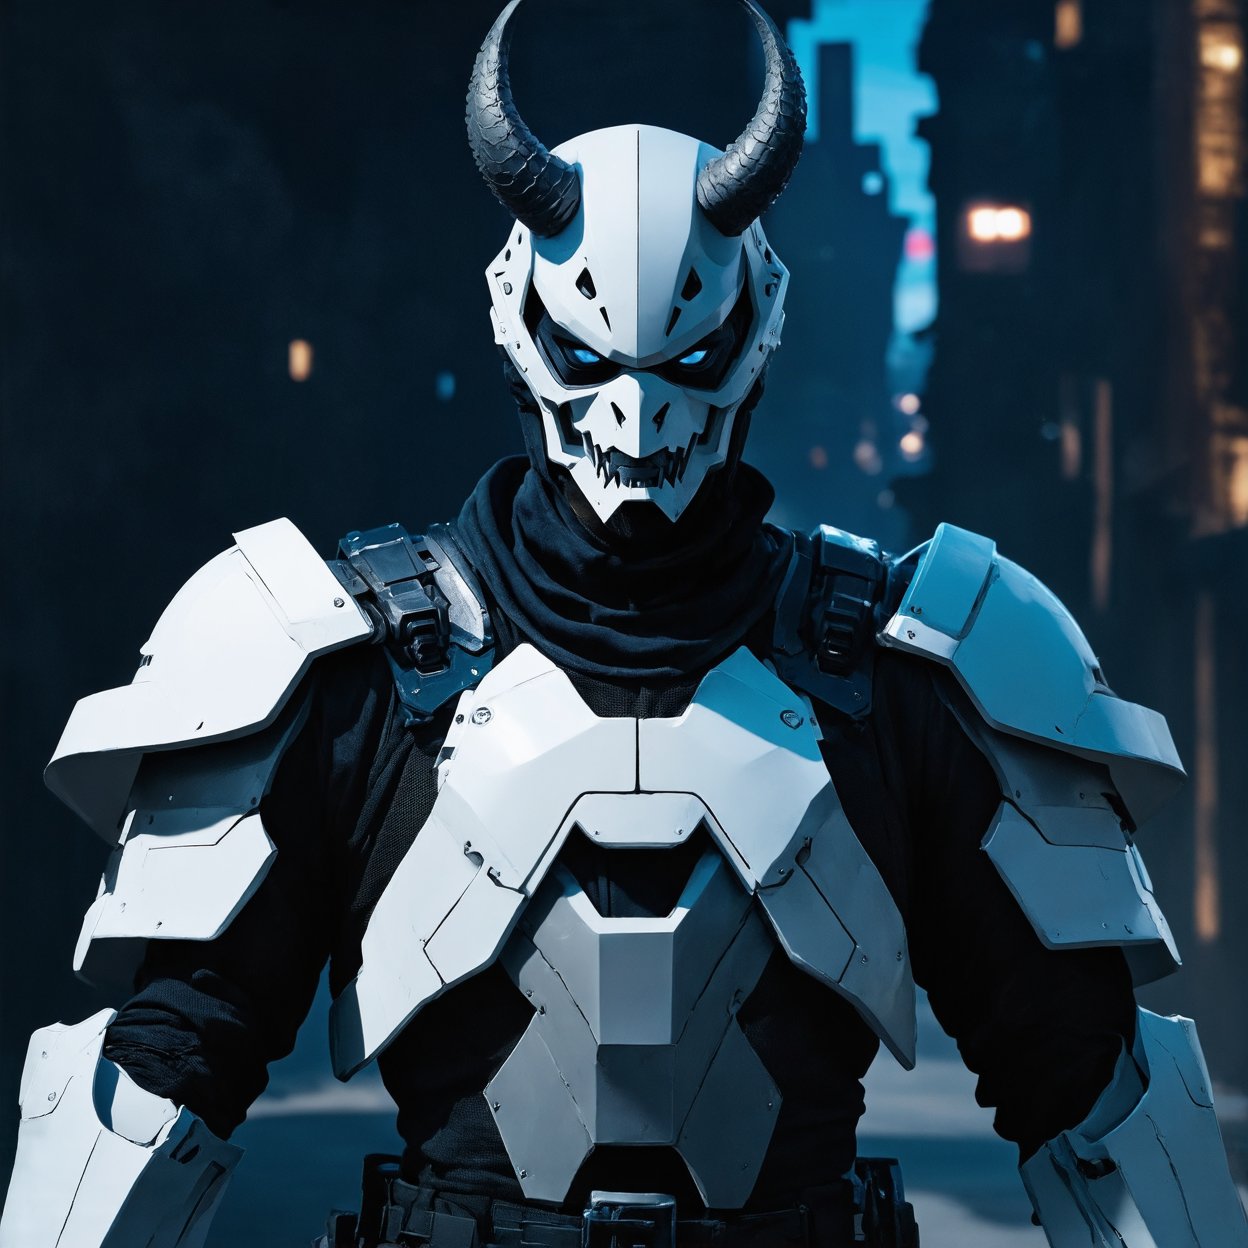 Close-up shot of the WHITE cybernatic samurai cyborg, wearing an oni mask and exoskeleton armor, amidst a dark and gritty urban landscape. The cybernetic enhancements are highlighted by a subtle blue glow, as the subject's gaze is fixed intently forward. The Enhanced Sensors on the helmet emit a faint hum, emphasizing the character's agility and quick repositioning capabilities. In the foreground, the nano tech grey circle gears at the center of the chest plate glimmer with a metallic sheen, contrasting with the dull gray of the urban surroundings. The massive shoulder armor plates are adorned with intricate circuitry patterns, adding to the overall futuristic aesthetic. The cyborg's dominant hand grasps a sleek, high-tech sword, while its free arm rests protectively across the chest. A dramatic shadow falls across the subject's face, accentuating the oni mask and emphasizing the character's mysterious and intimidating presence.